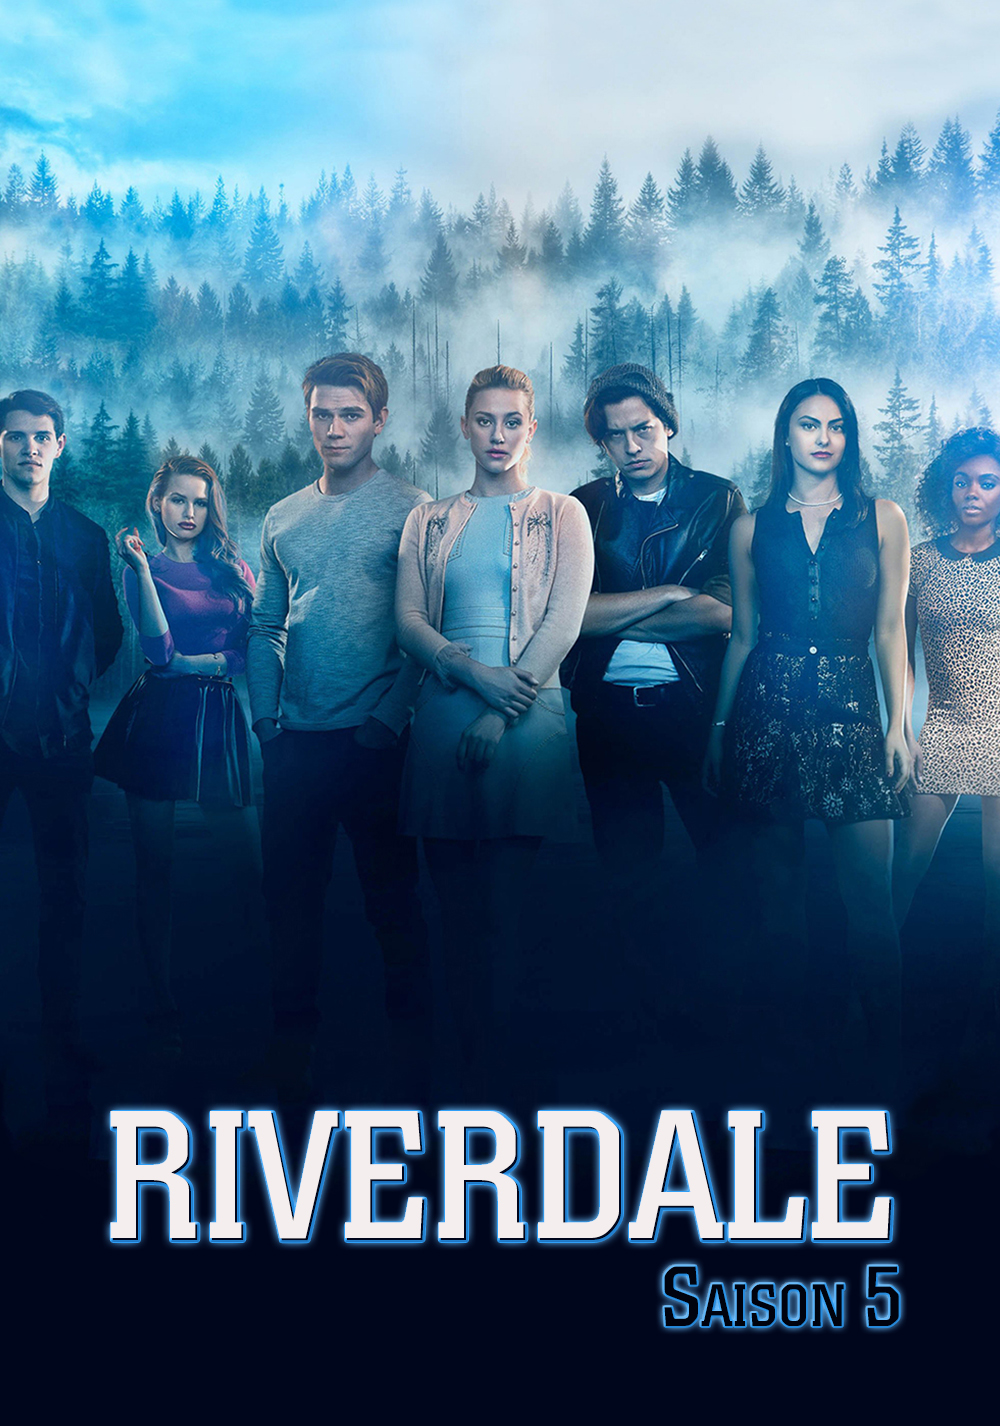 Riverdale S05E06 - Chapter Eighty-Two Back to School.